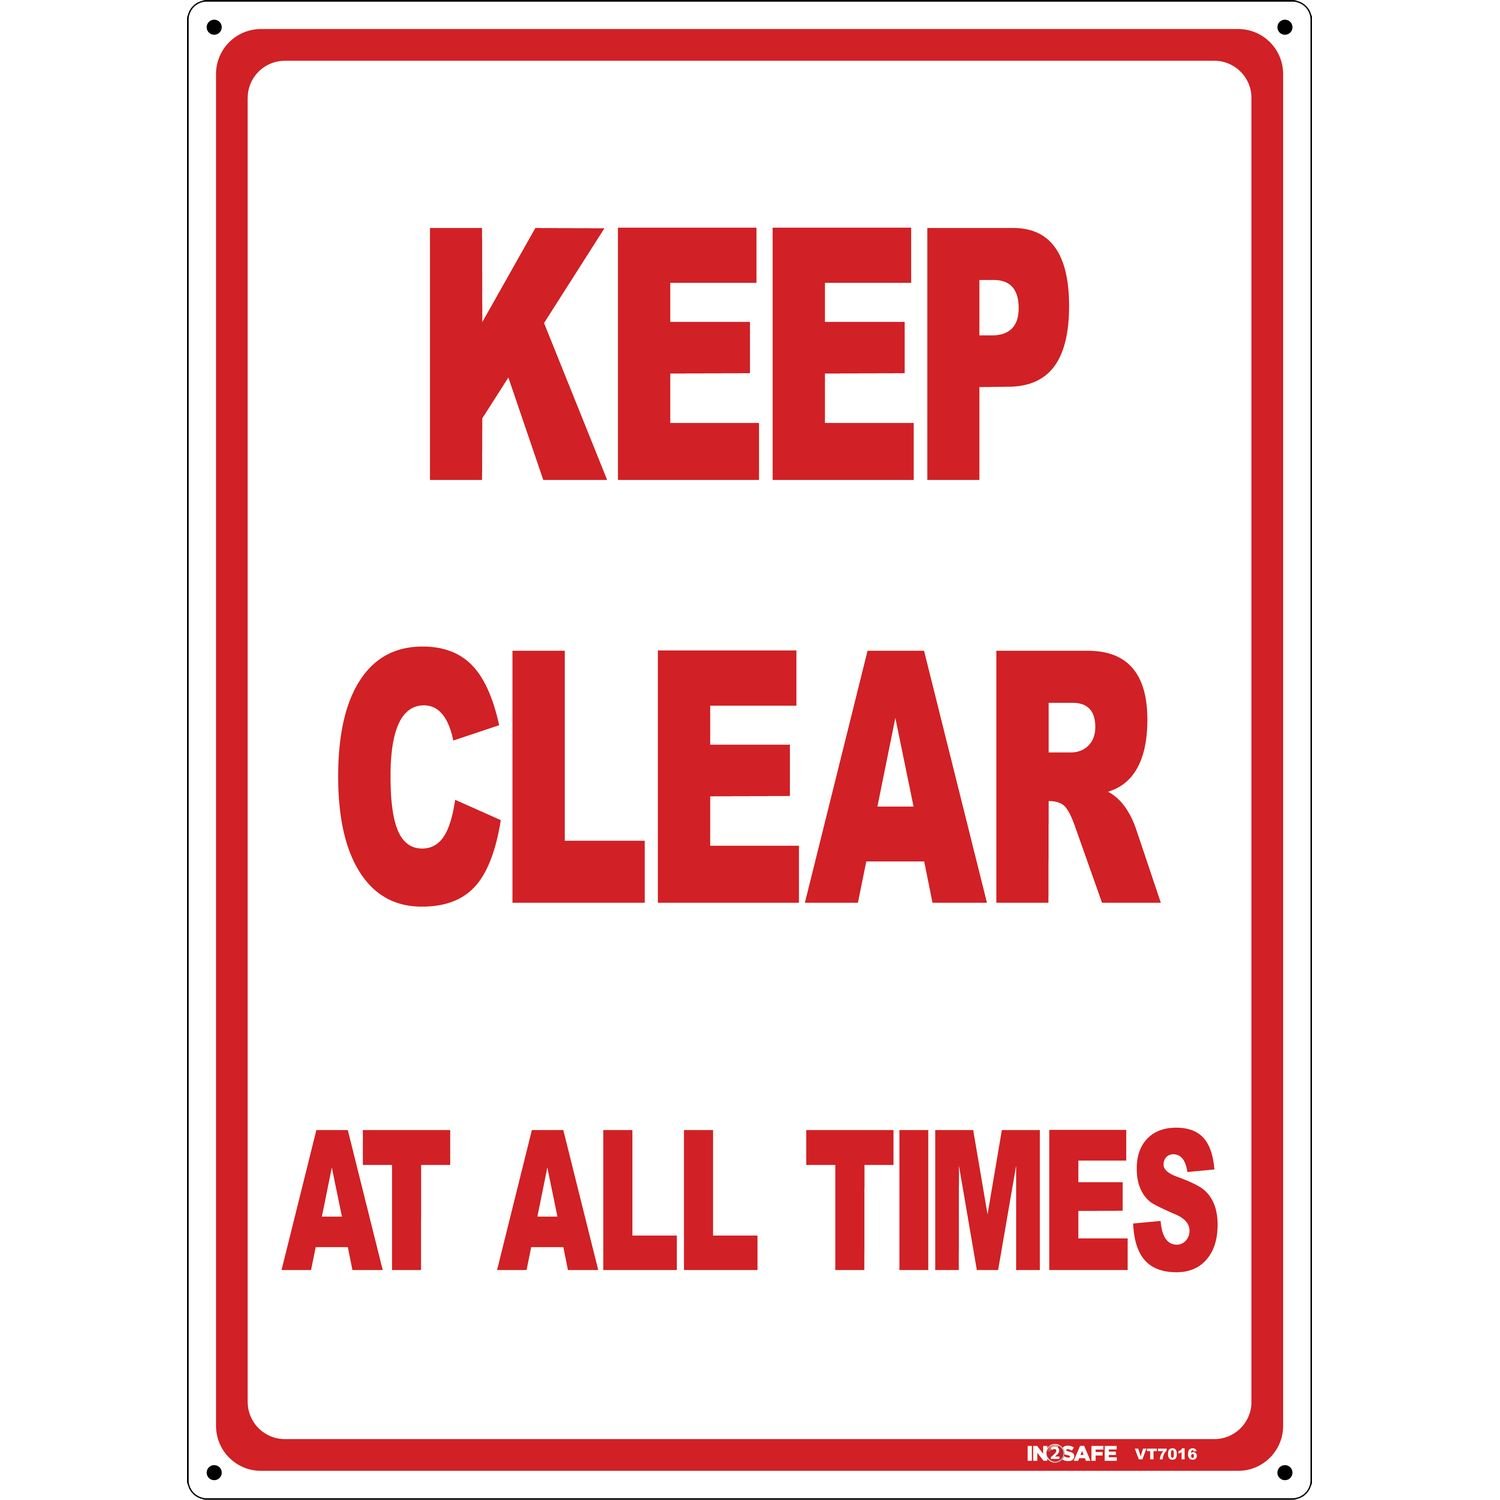 KEEP CLEAR At All Times